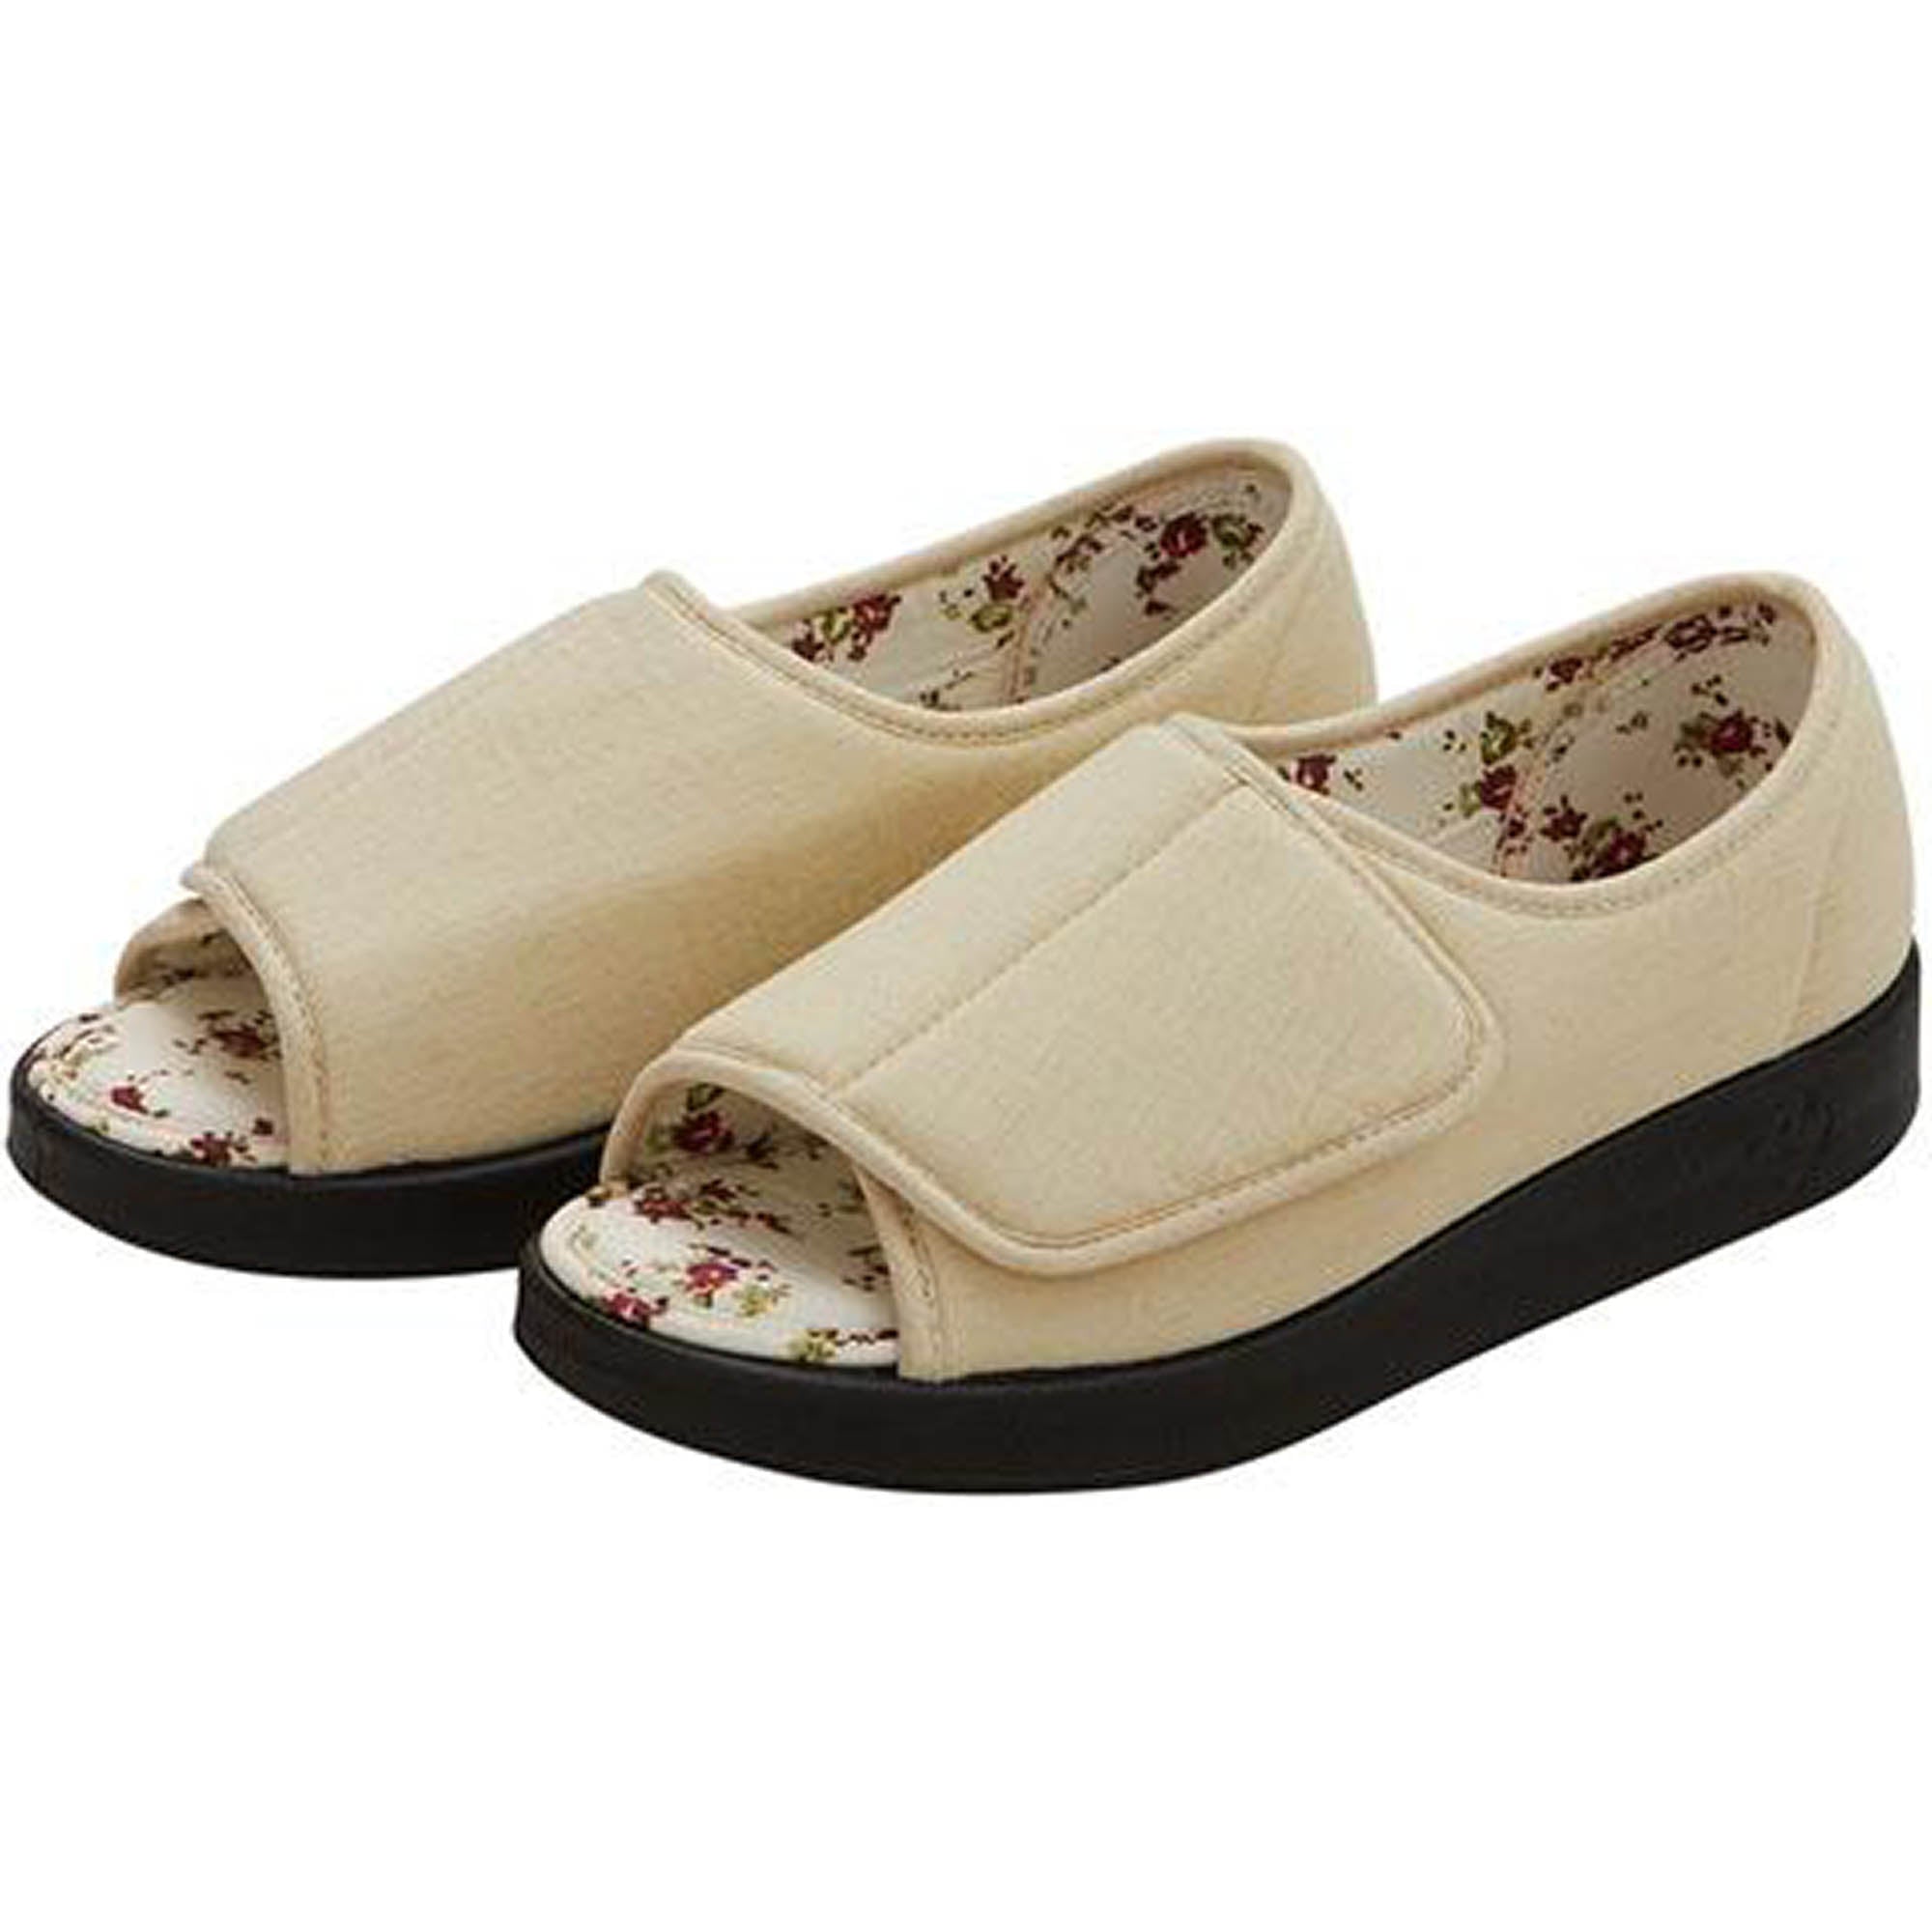 Silverts Women's Extra Wide Open-Toed Shoes - Misty Rose - 8